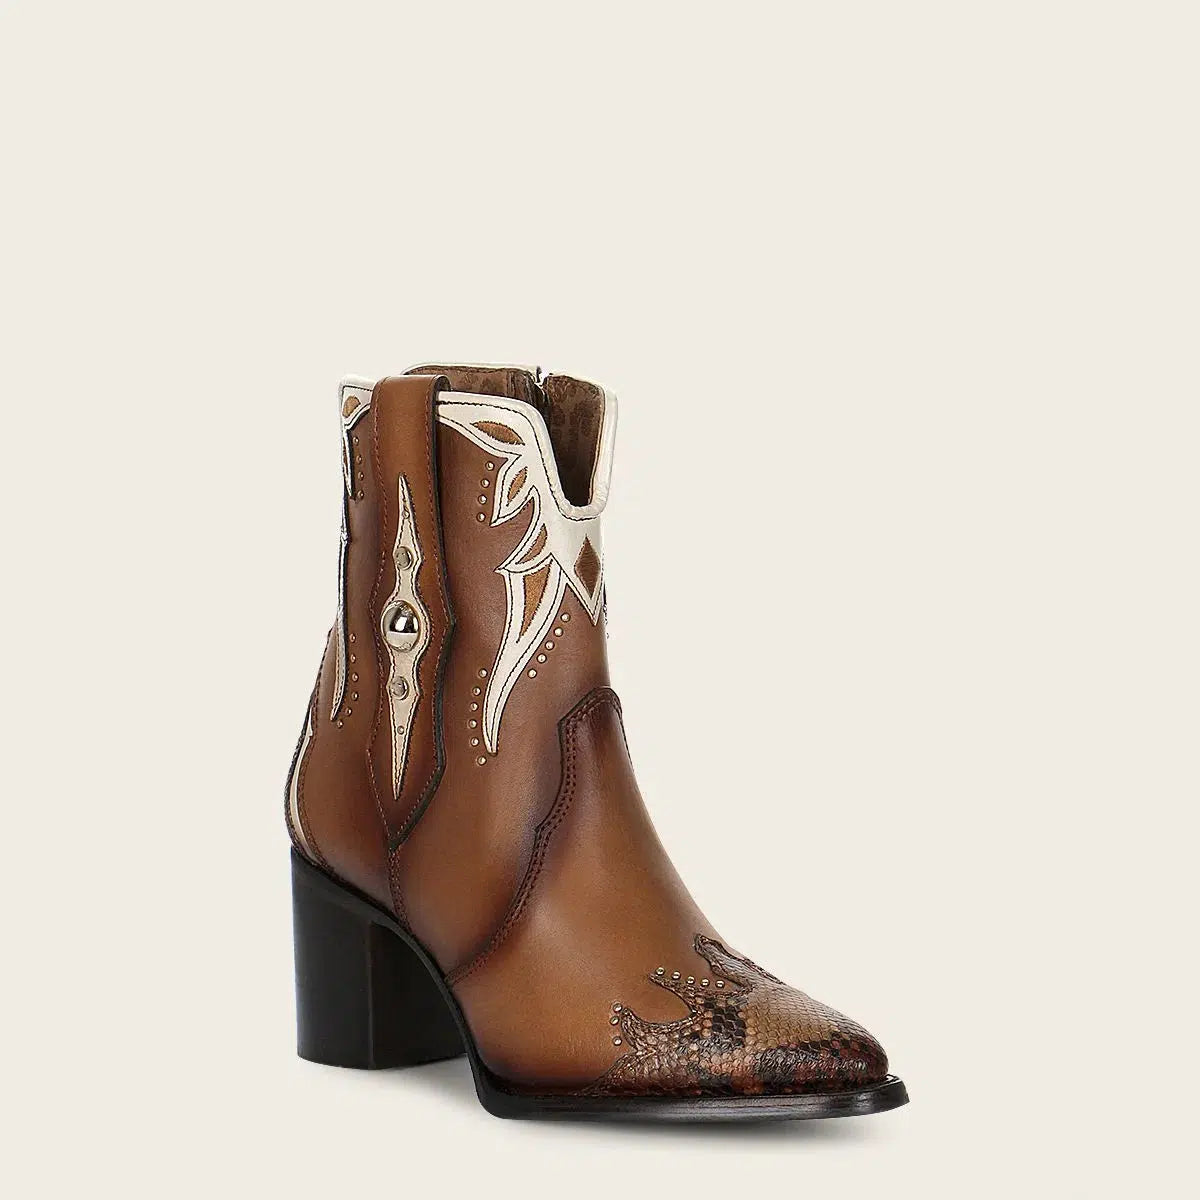 4Q06PH - Cuadra brown western cowgirl python skin ankle boots for women-Kuet.us